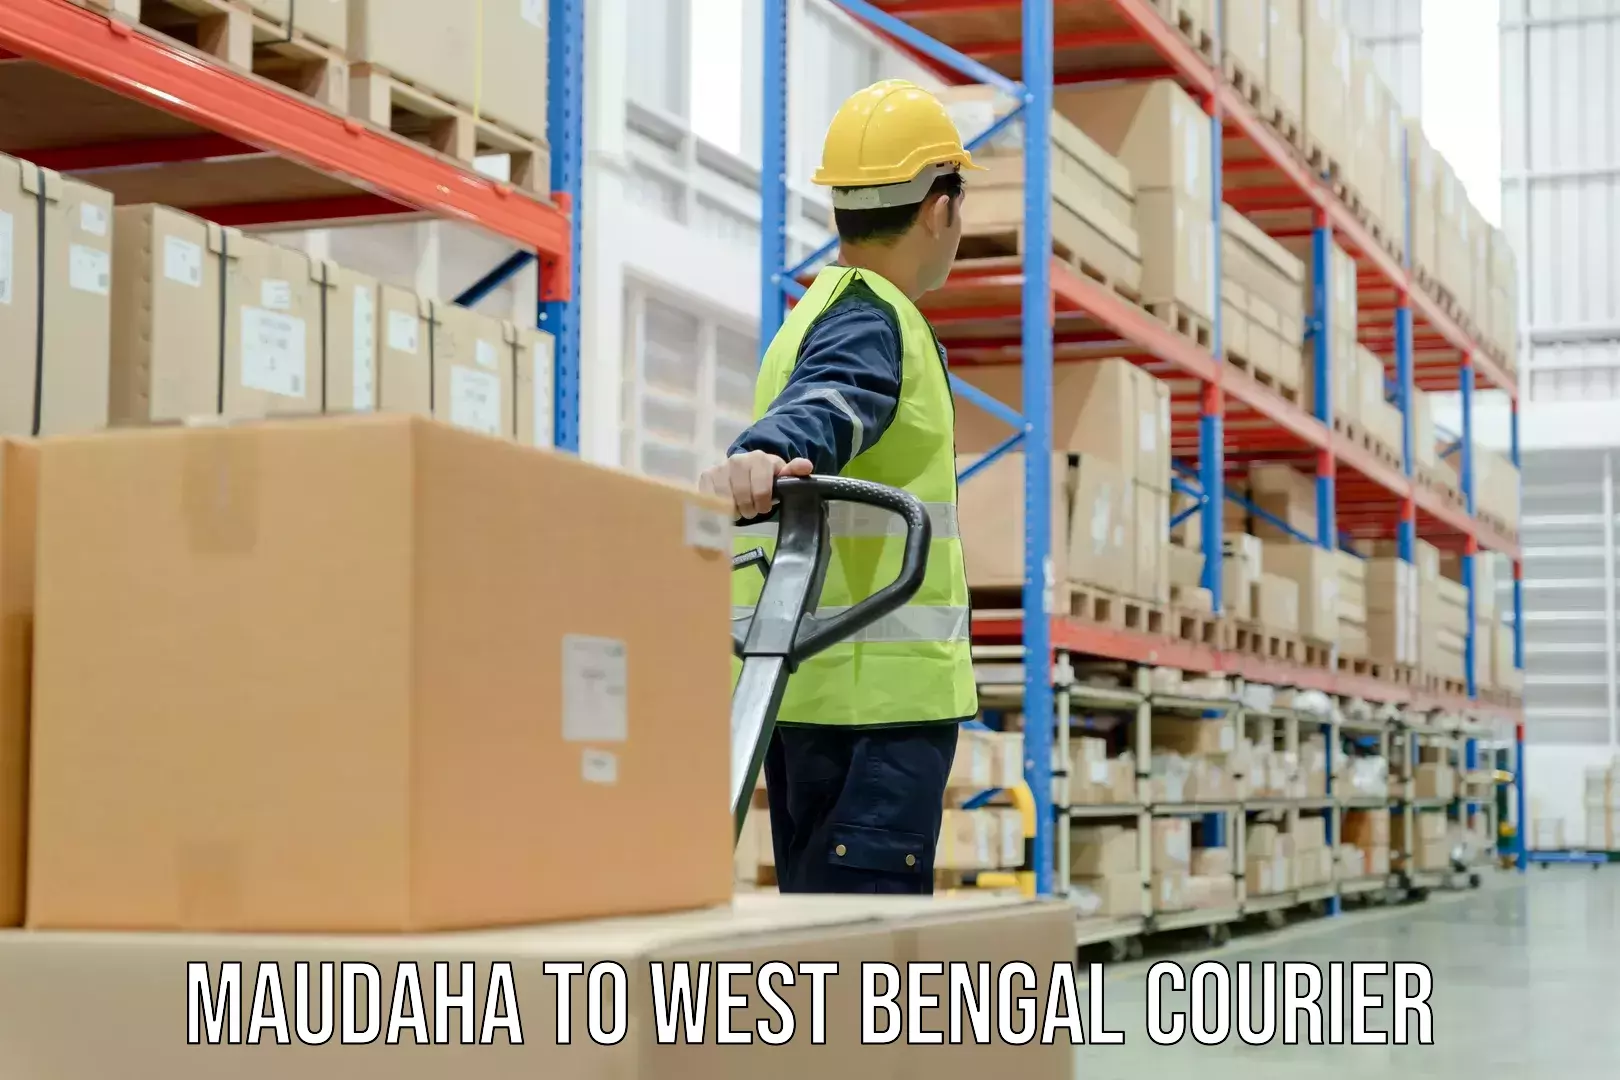 High-speed parcel service Maudaha to West Bengal